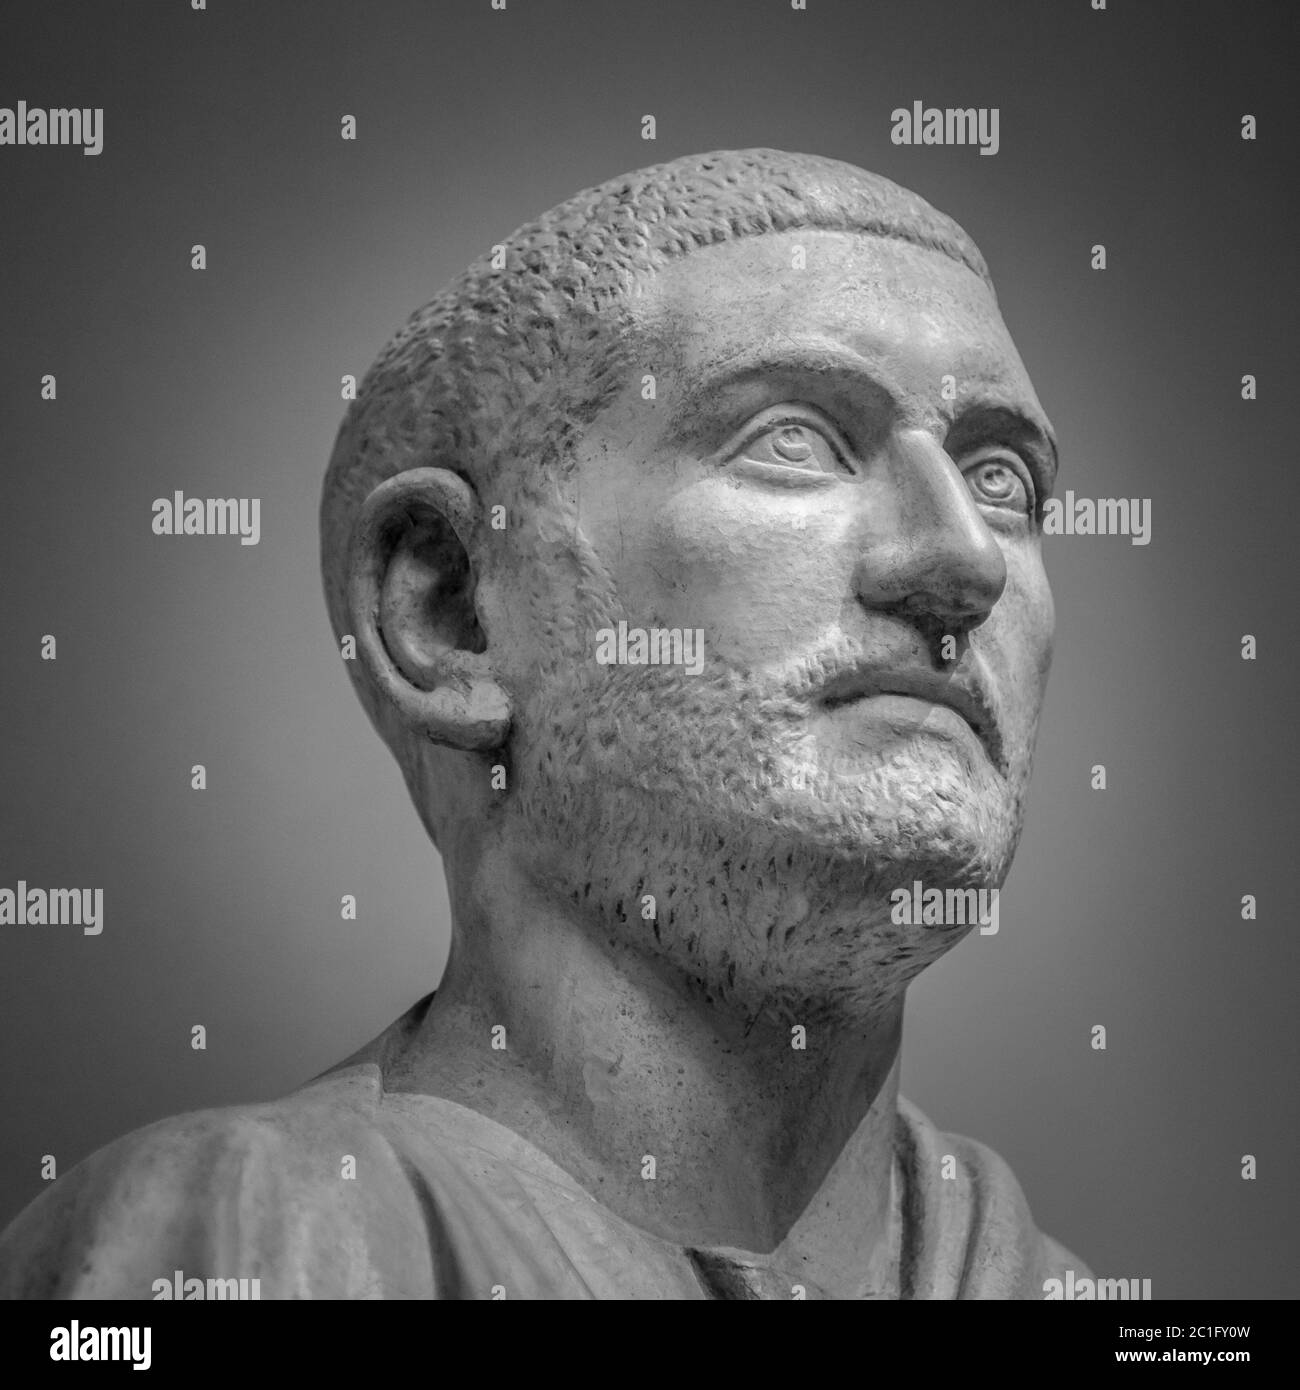 The ancient marble head of man sculpture Stock Photo